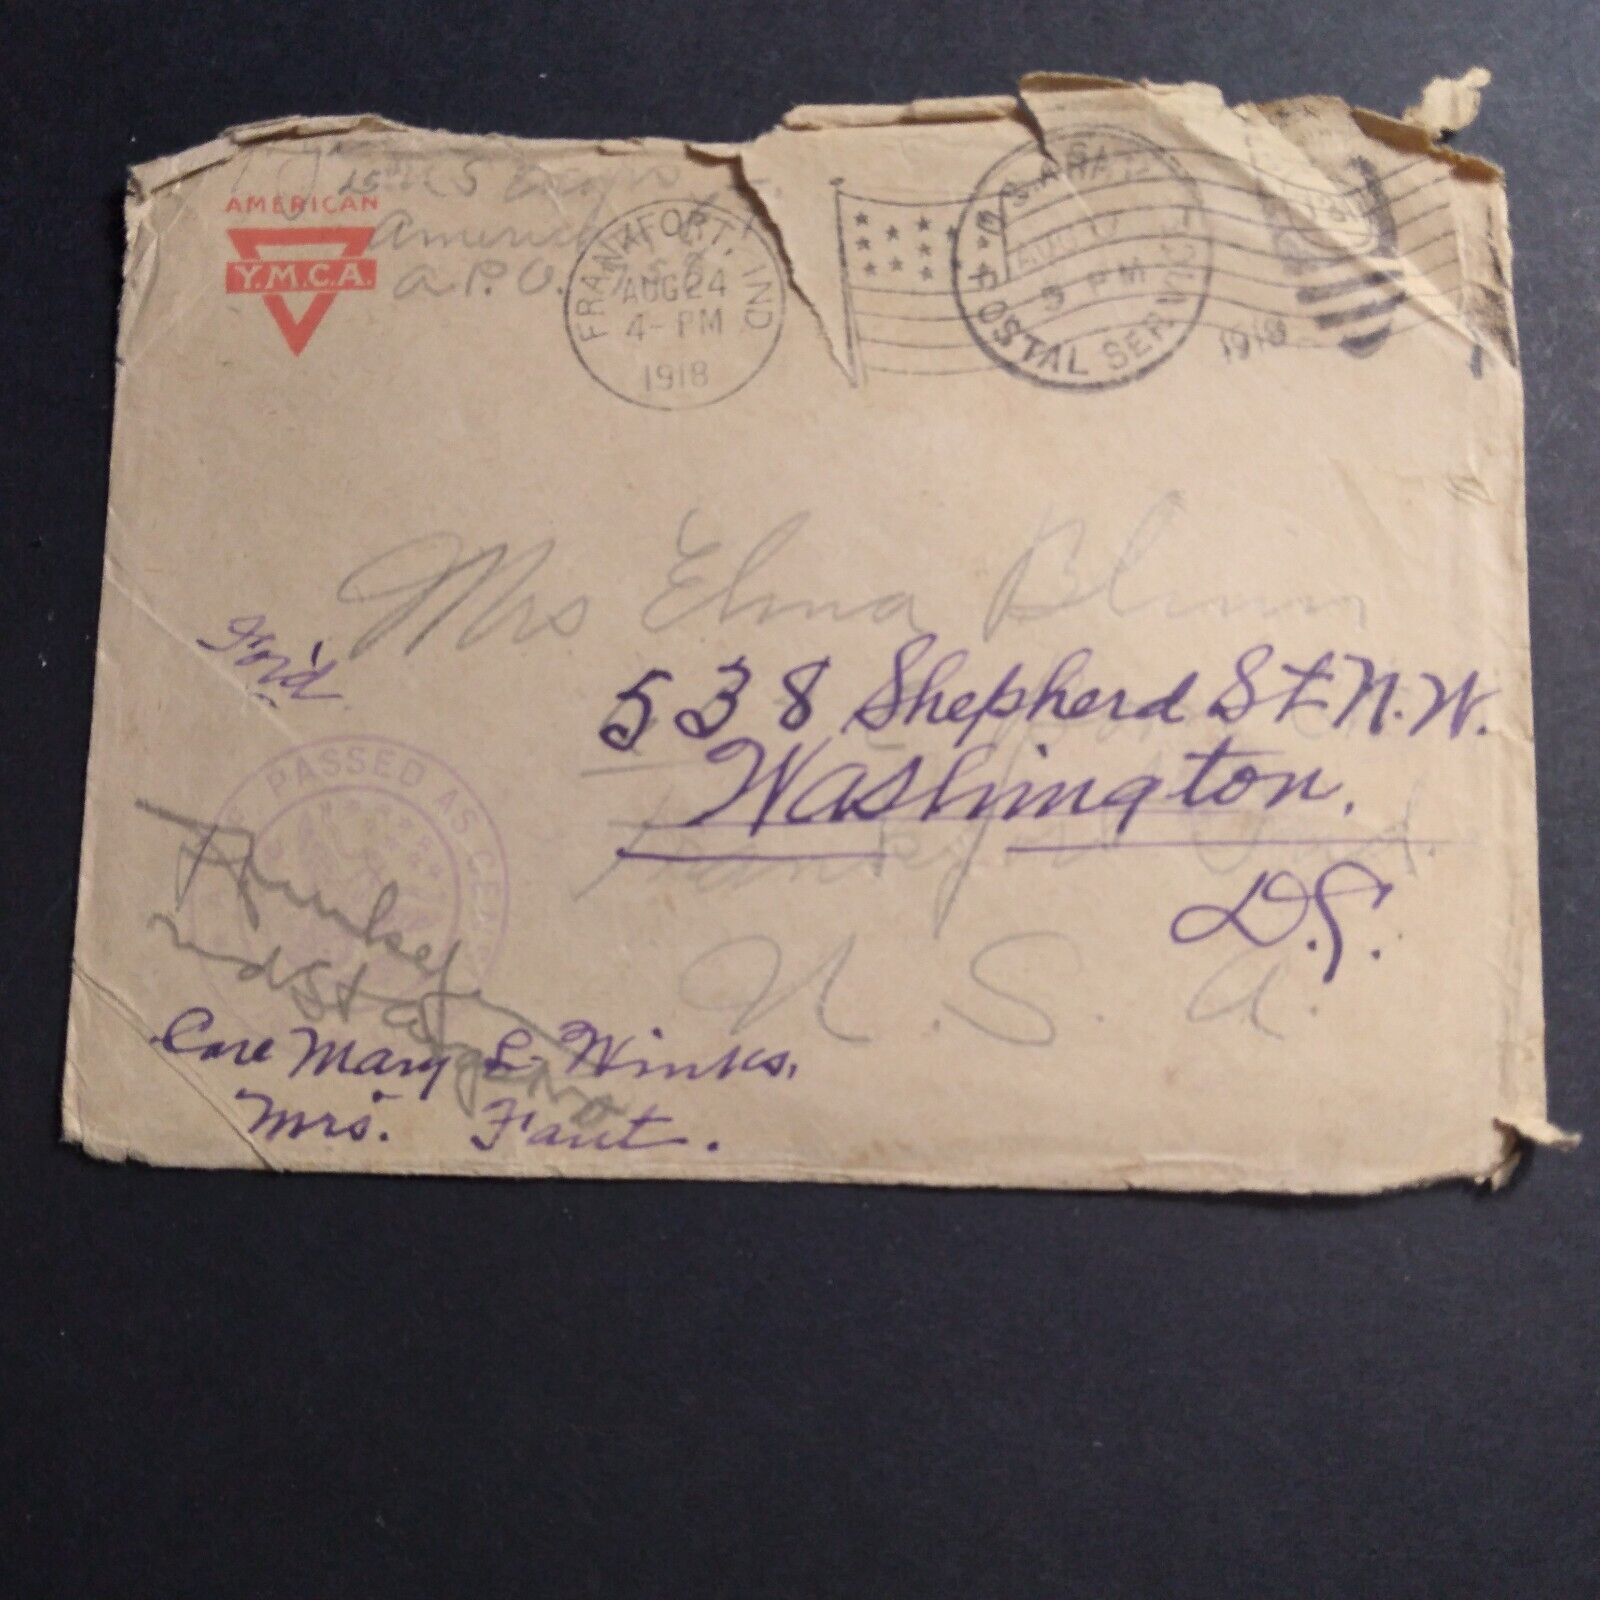 Censered Soldier's Mail Cover From WW1 YMCA Contributed Stationary. Flag Cancel